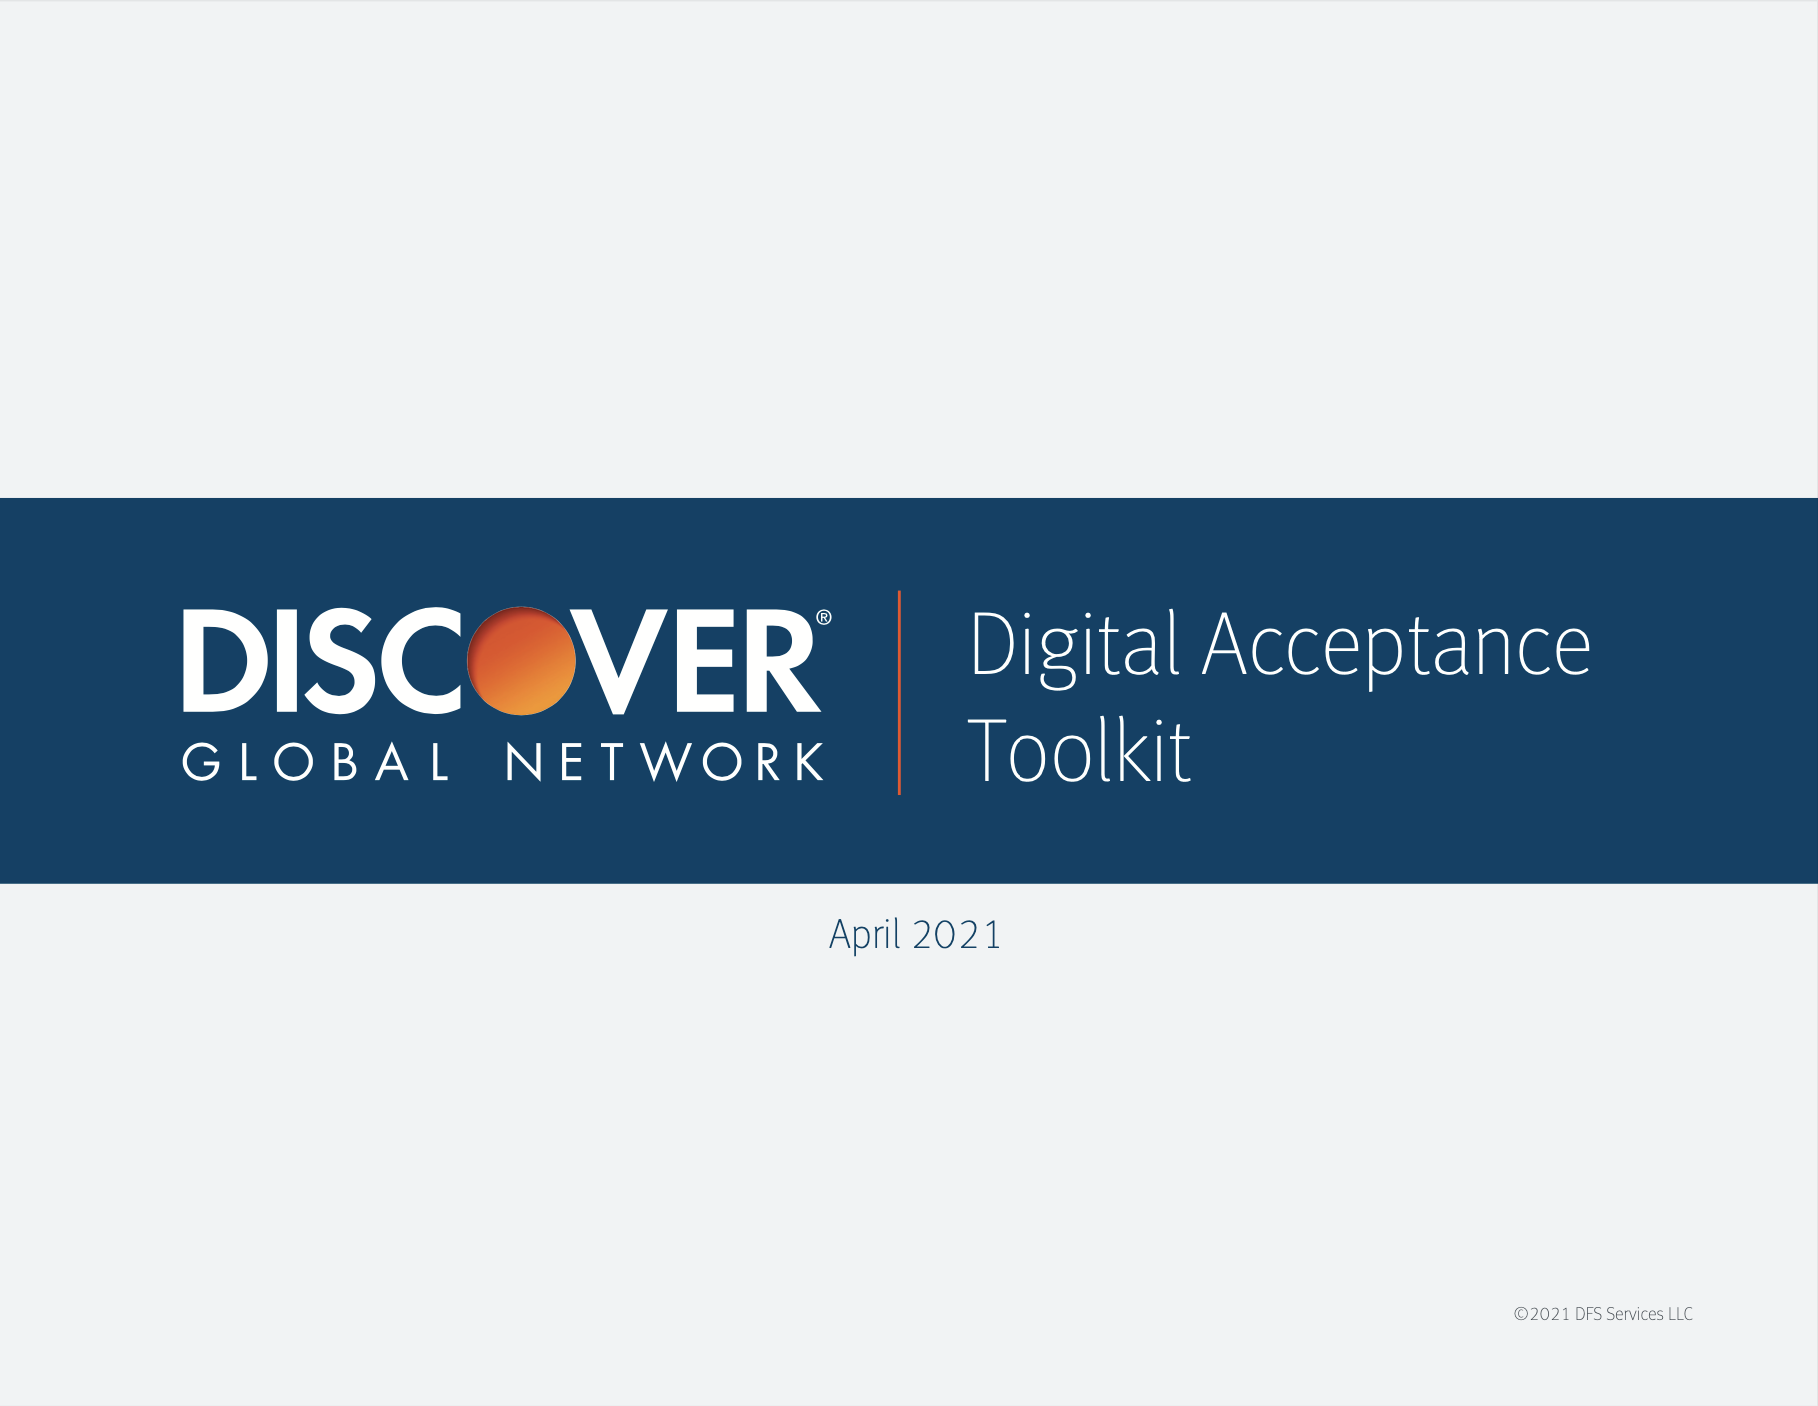 Digital Acceptance Toolkit Example Image